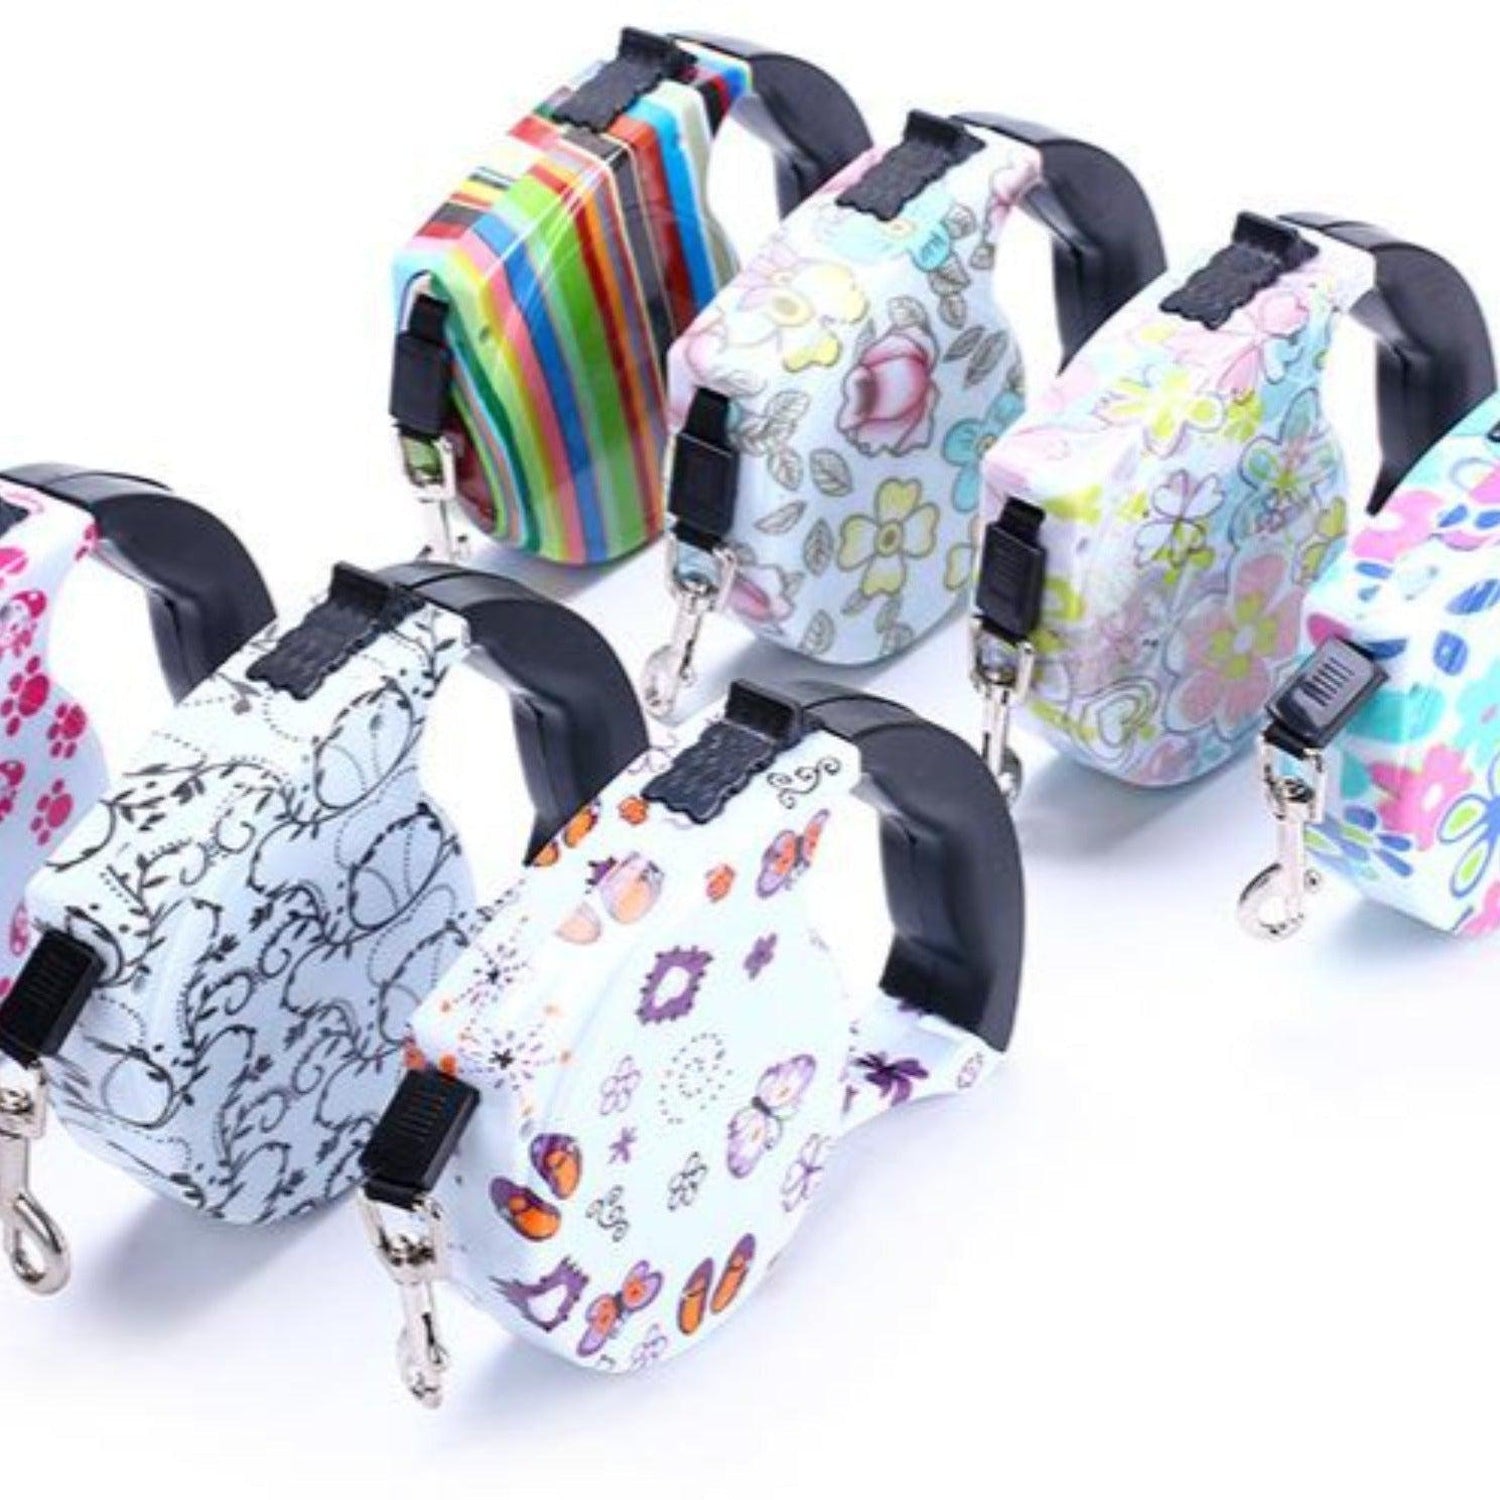 Colorful Automatic Retractable Dog Lead